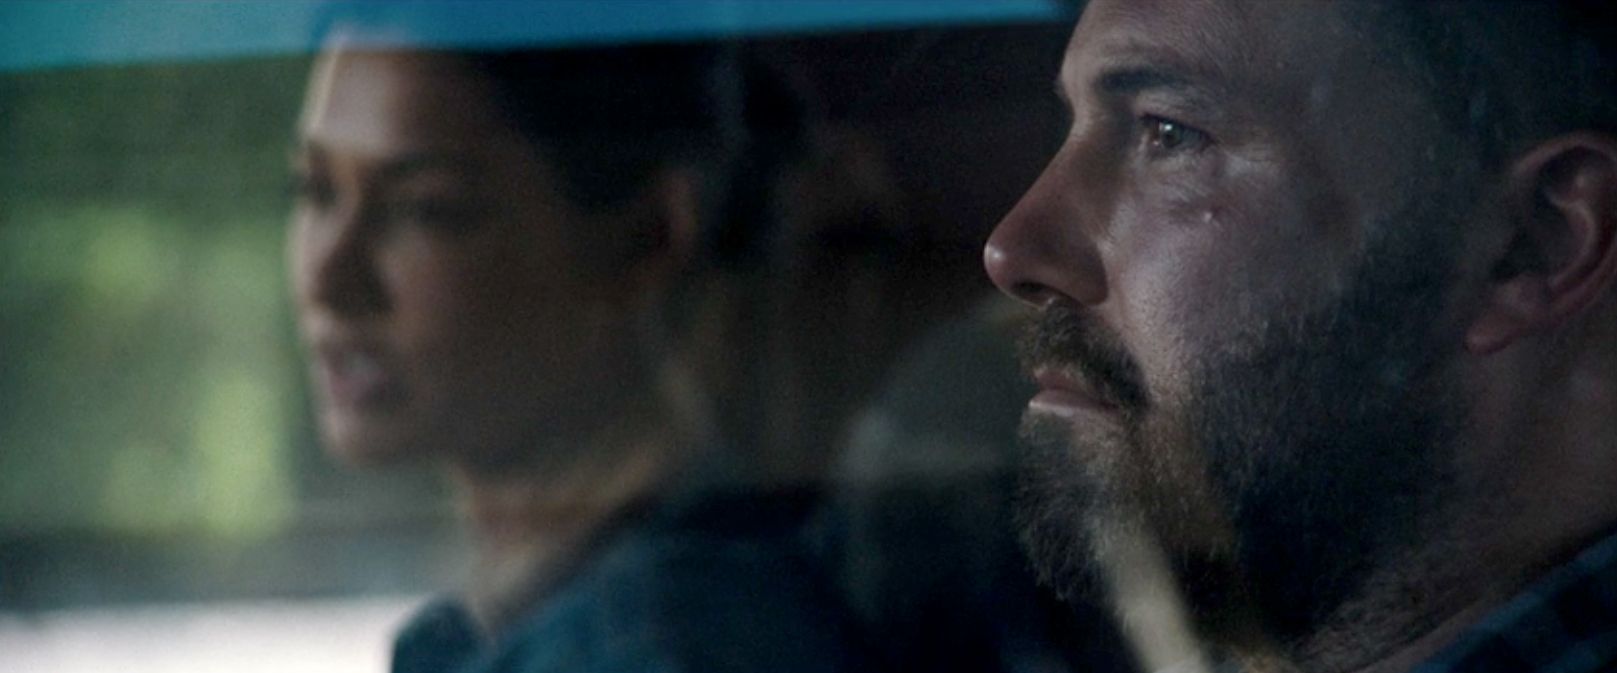 Ben Affleck’s Movie ‘The Way Back’ Is ‘Really Important’ Trailer